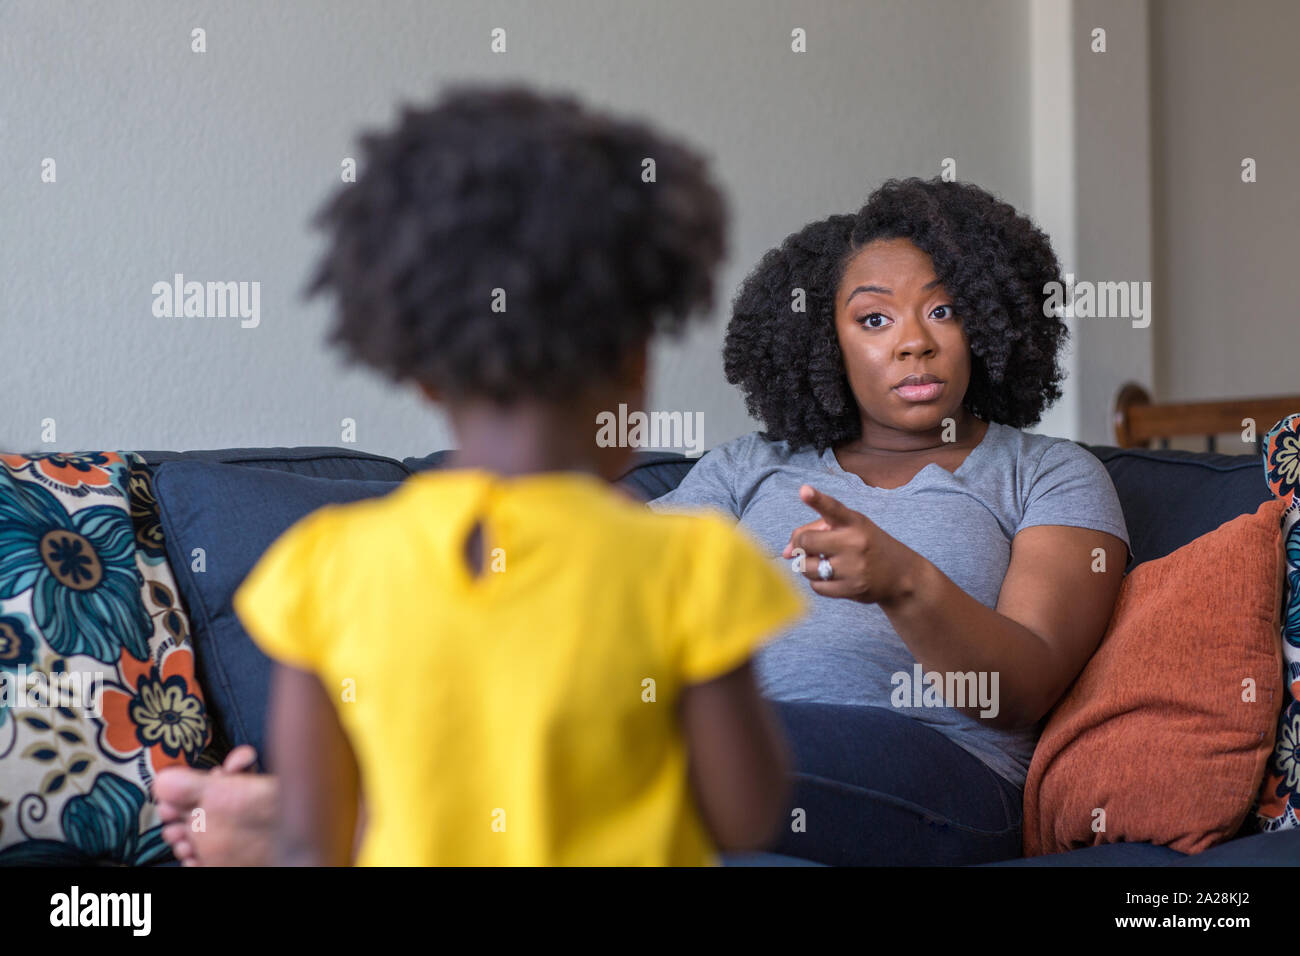 African American mother disciplining parenting her young child. Stock Photo